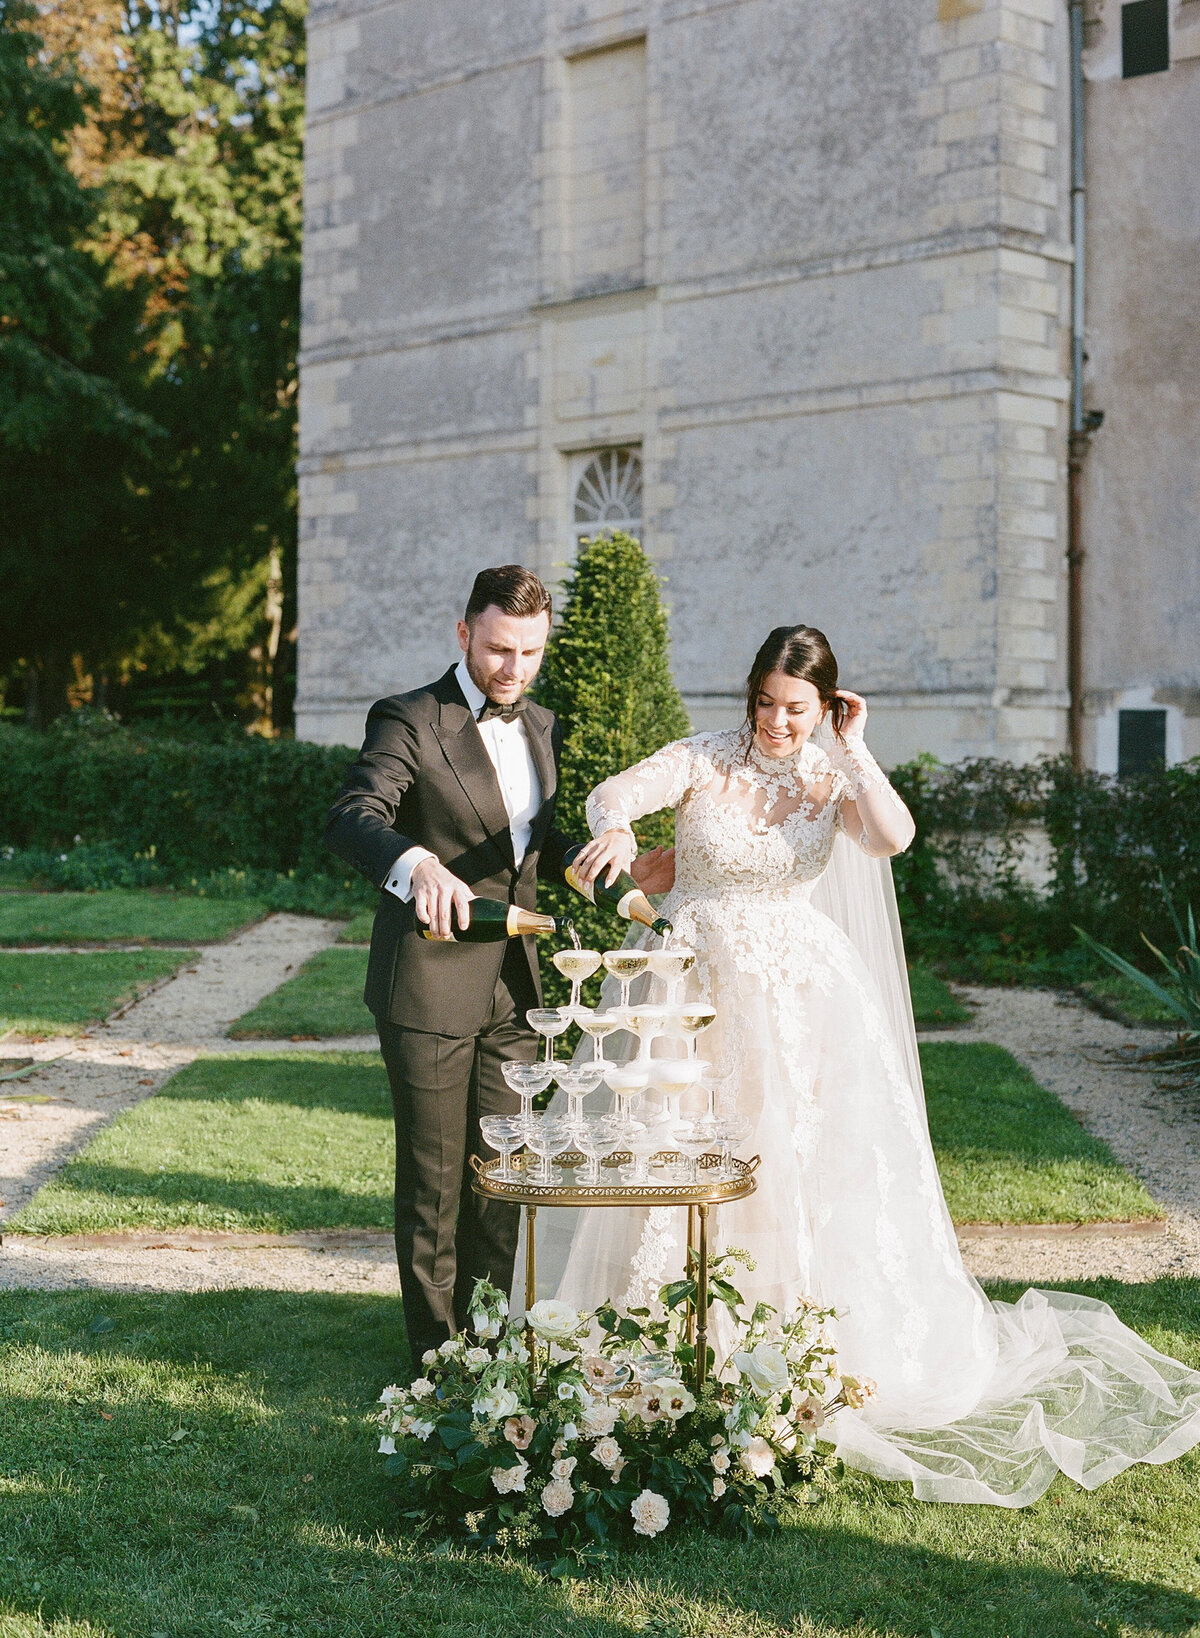 Jennifer Fox Weddings English speaking wedding planning & design agency in France crafting refined and bespoke weddings and celebrations Provence, Paris and destination Molly-Carr-Photography-Natalie-Ryan-Dinner-9